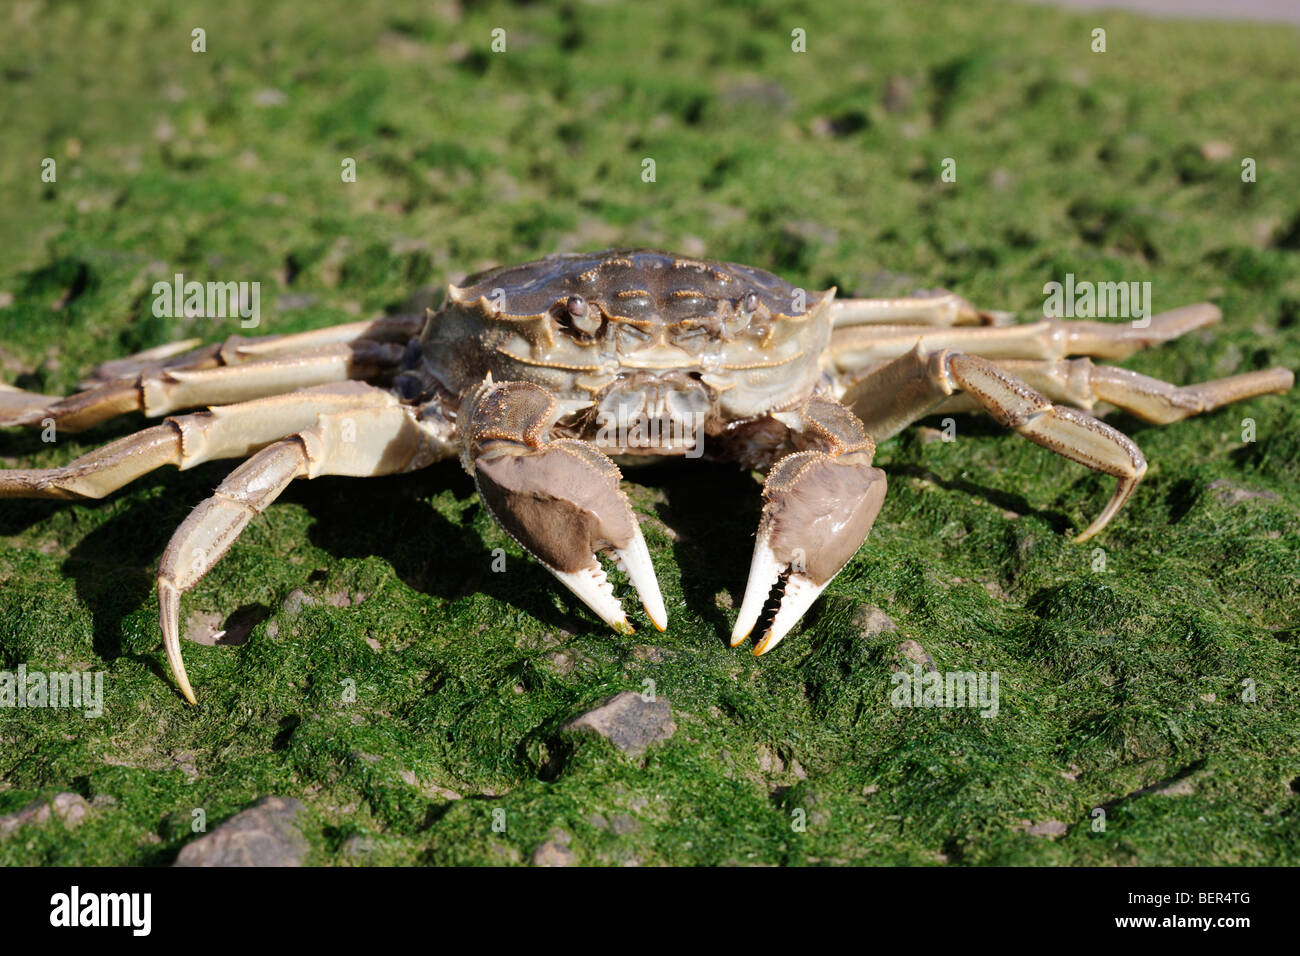 Crabe chinois, Eriocheir sinensis, Thames, Londres, octobre 2009 Banque D'Images